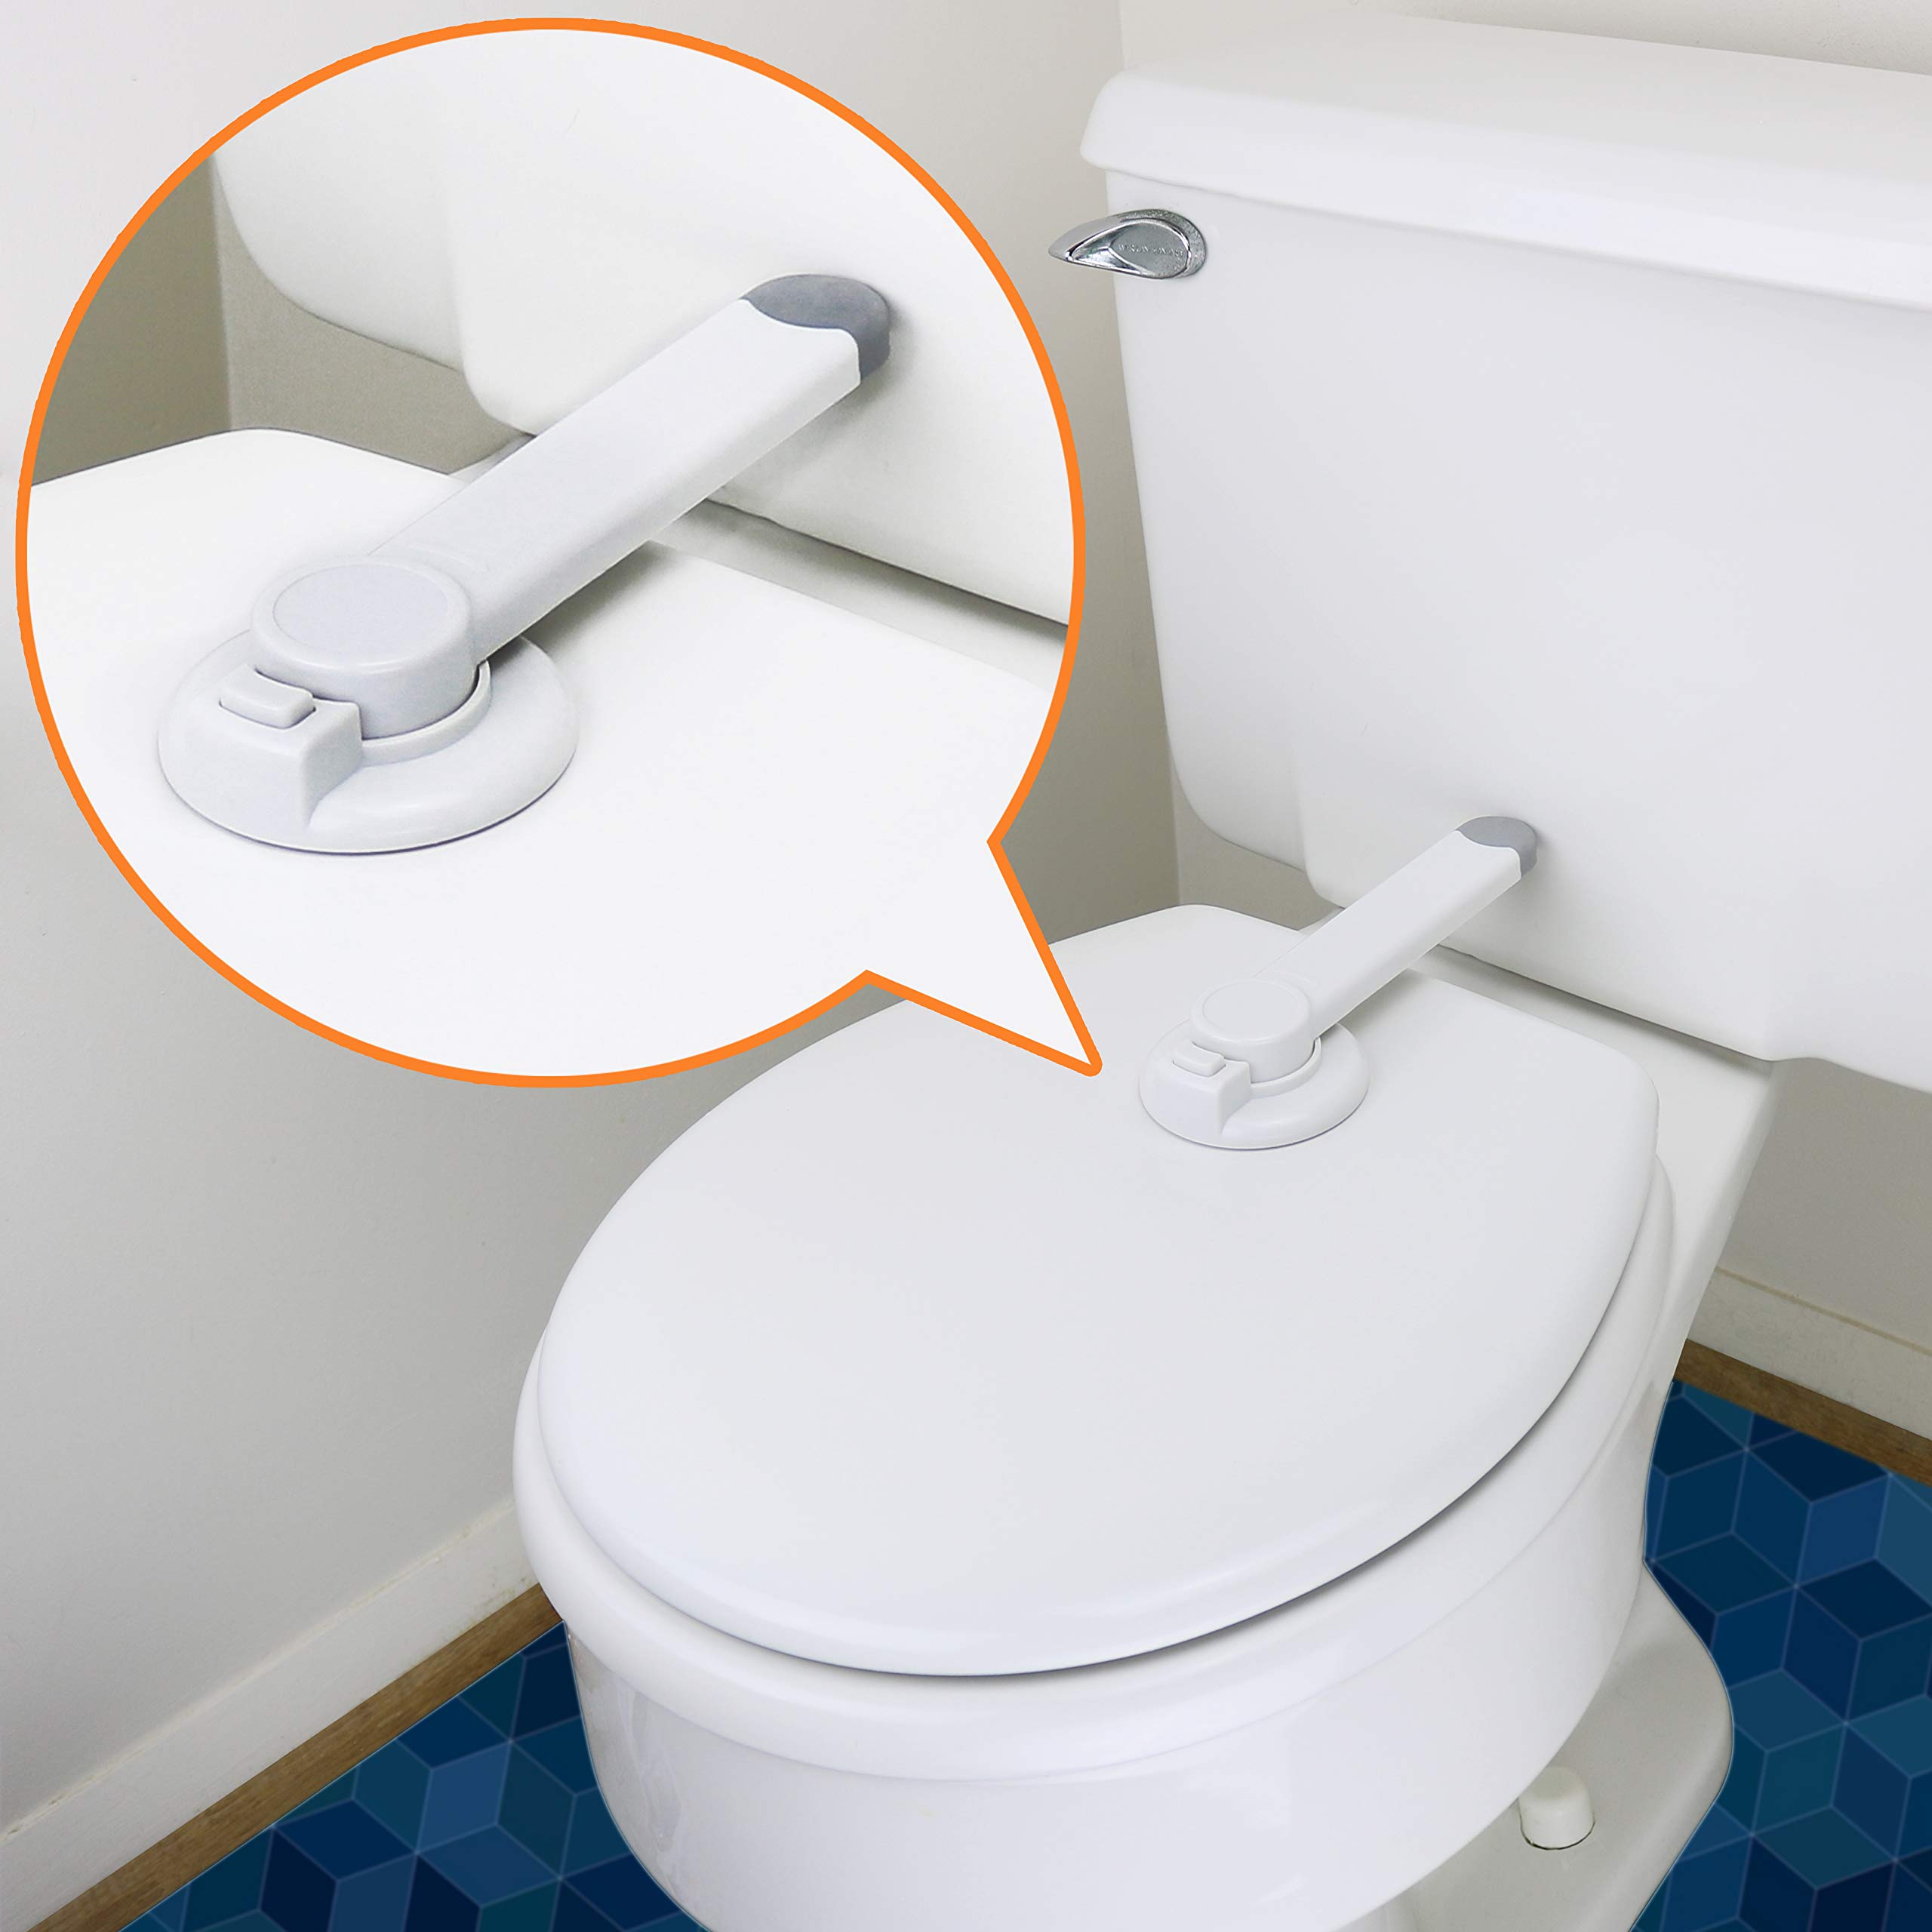 baby proofing toilet shut lock Toilet lock child safety » baby proofing products